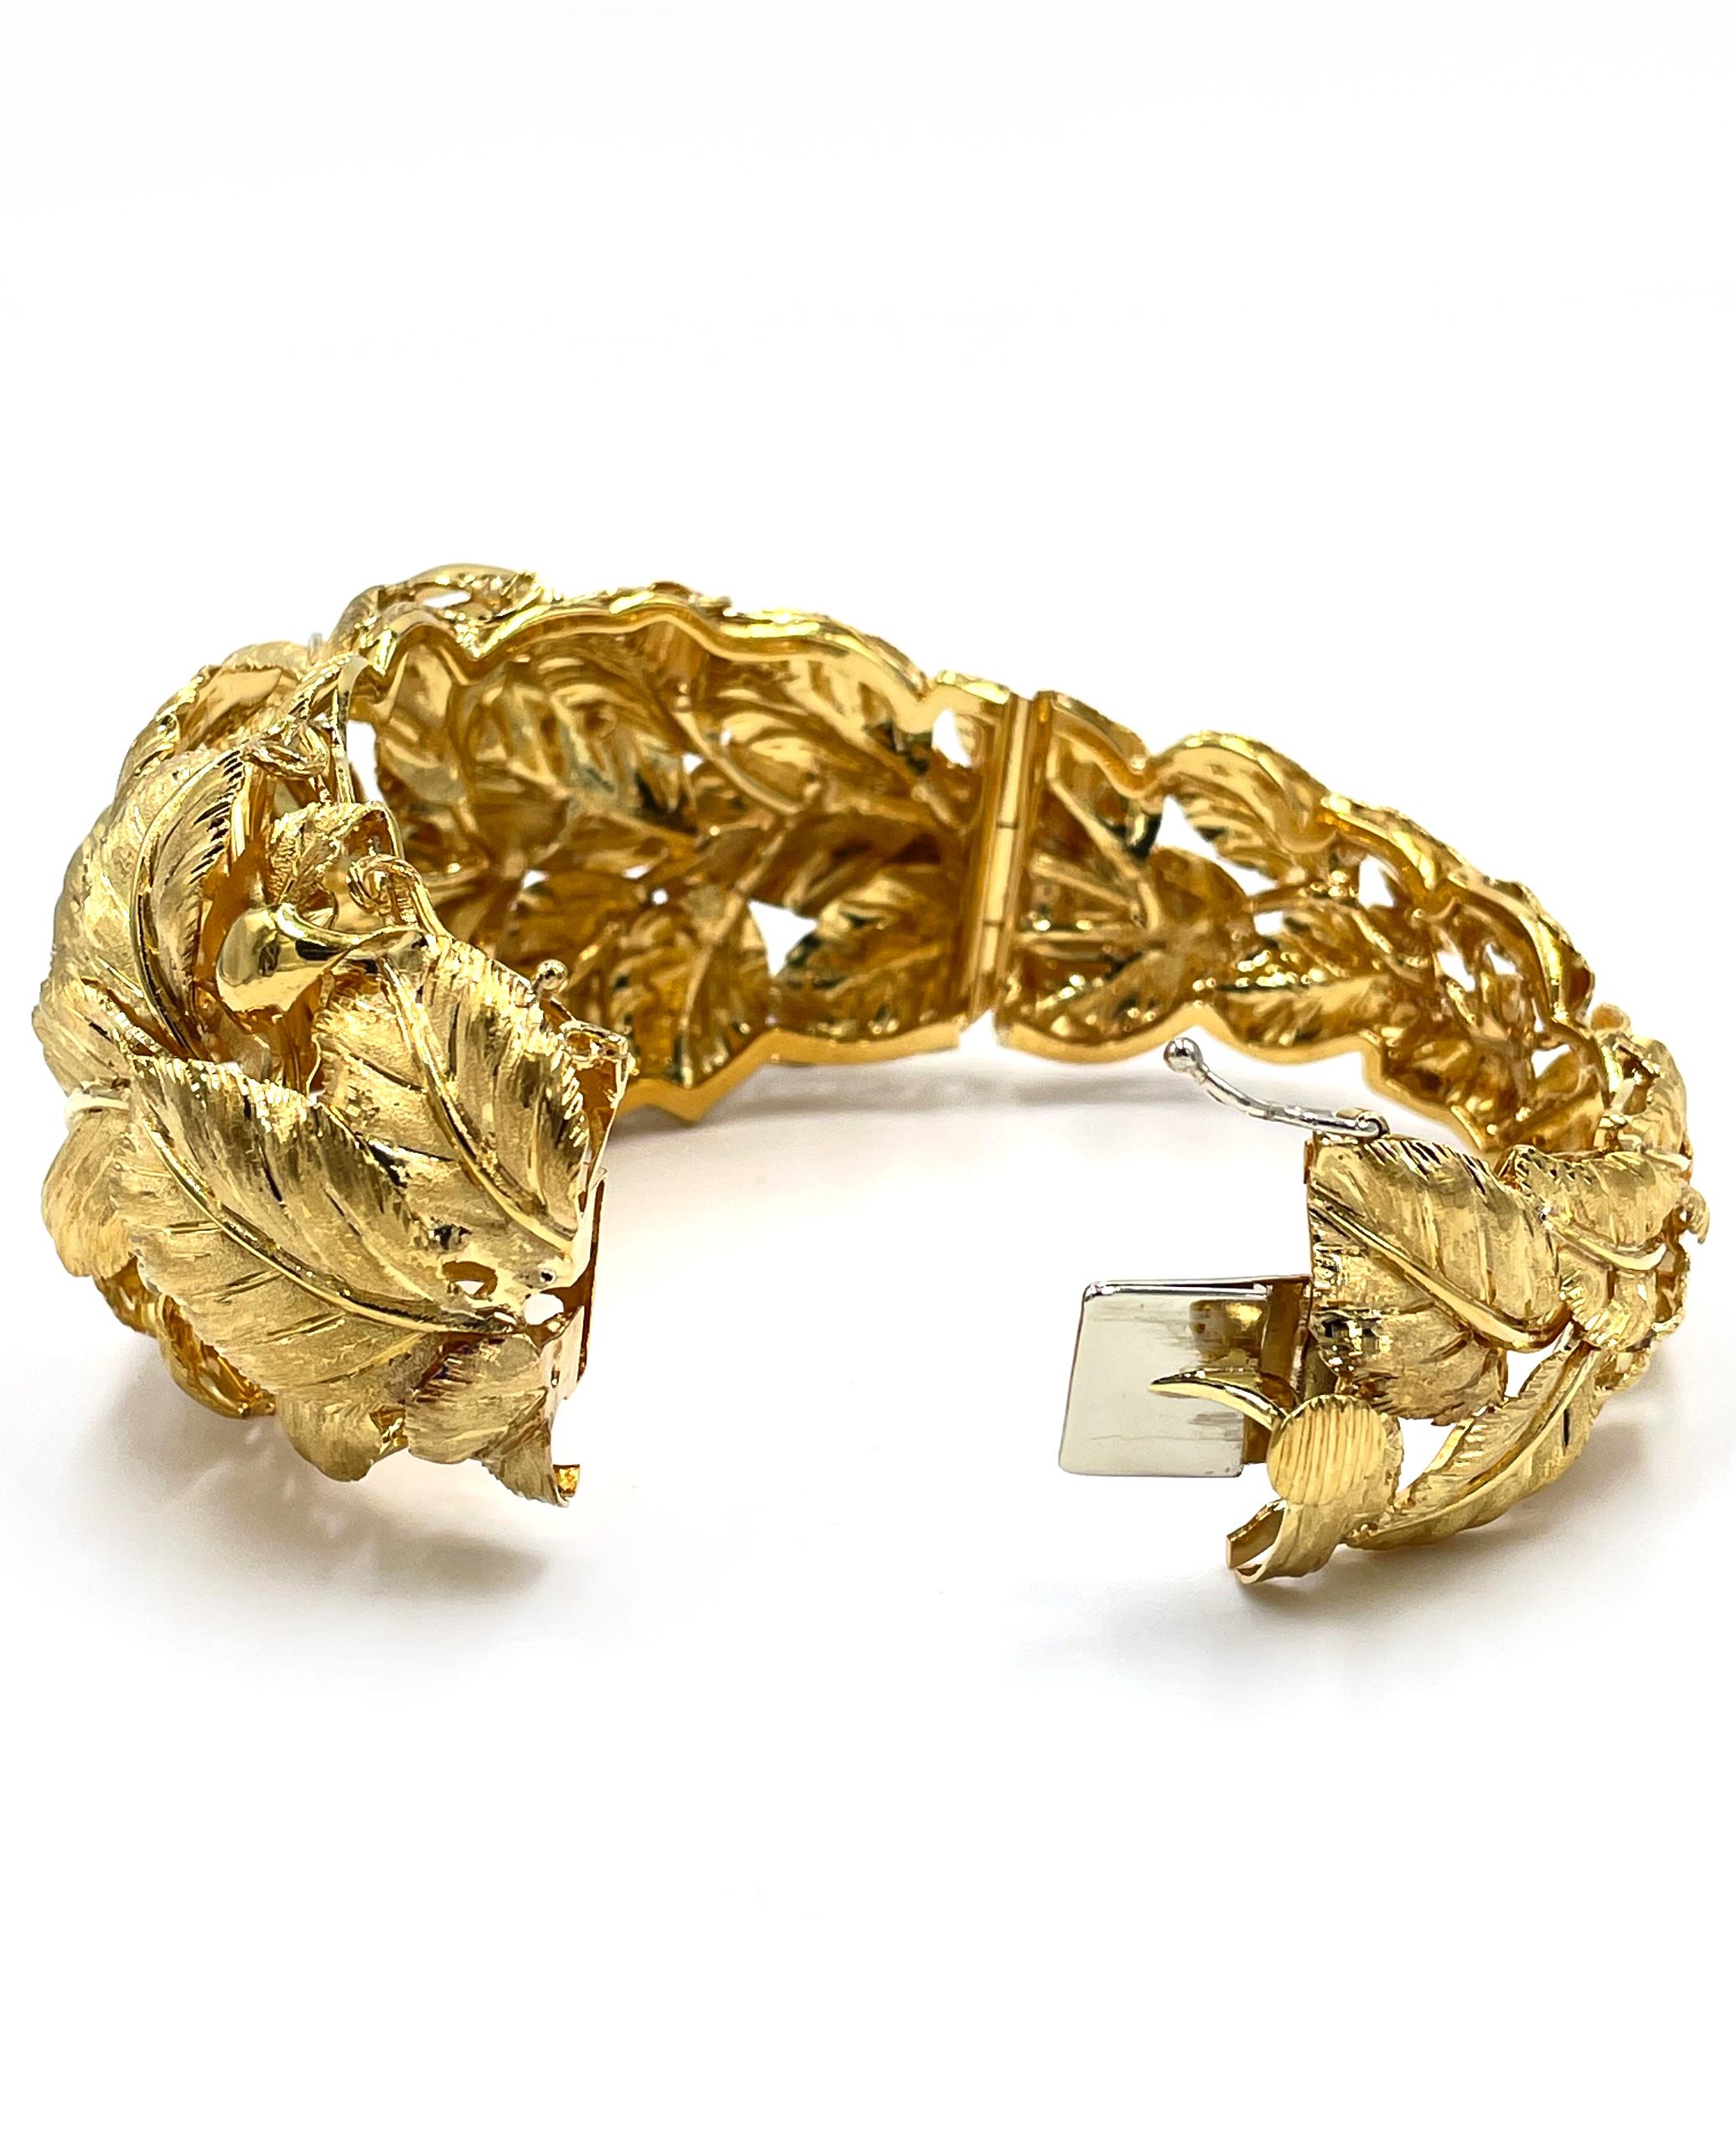 Preowned Vintage 18K Yellow Gold Italian Leaf Wide Statement Bracelet For Sale 2